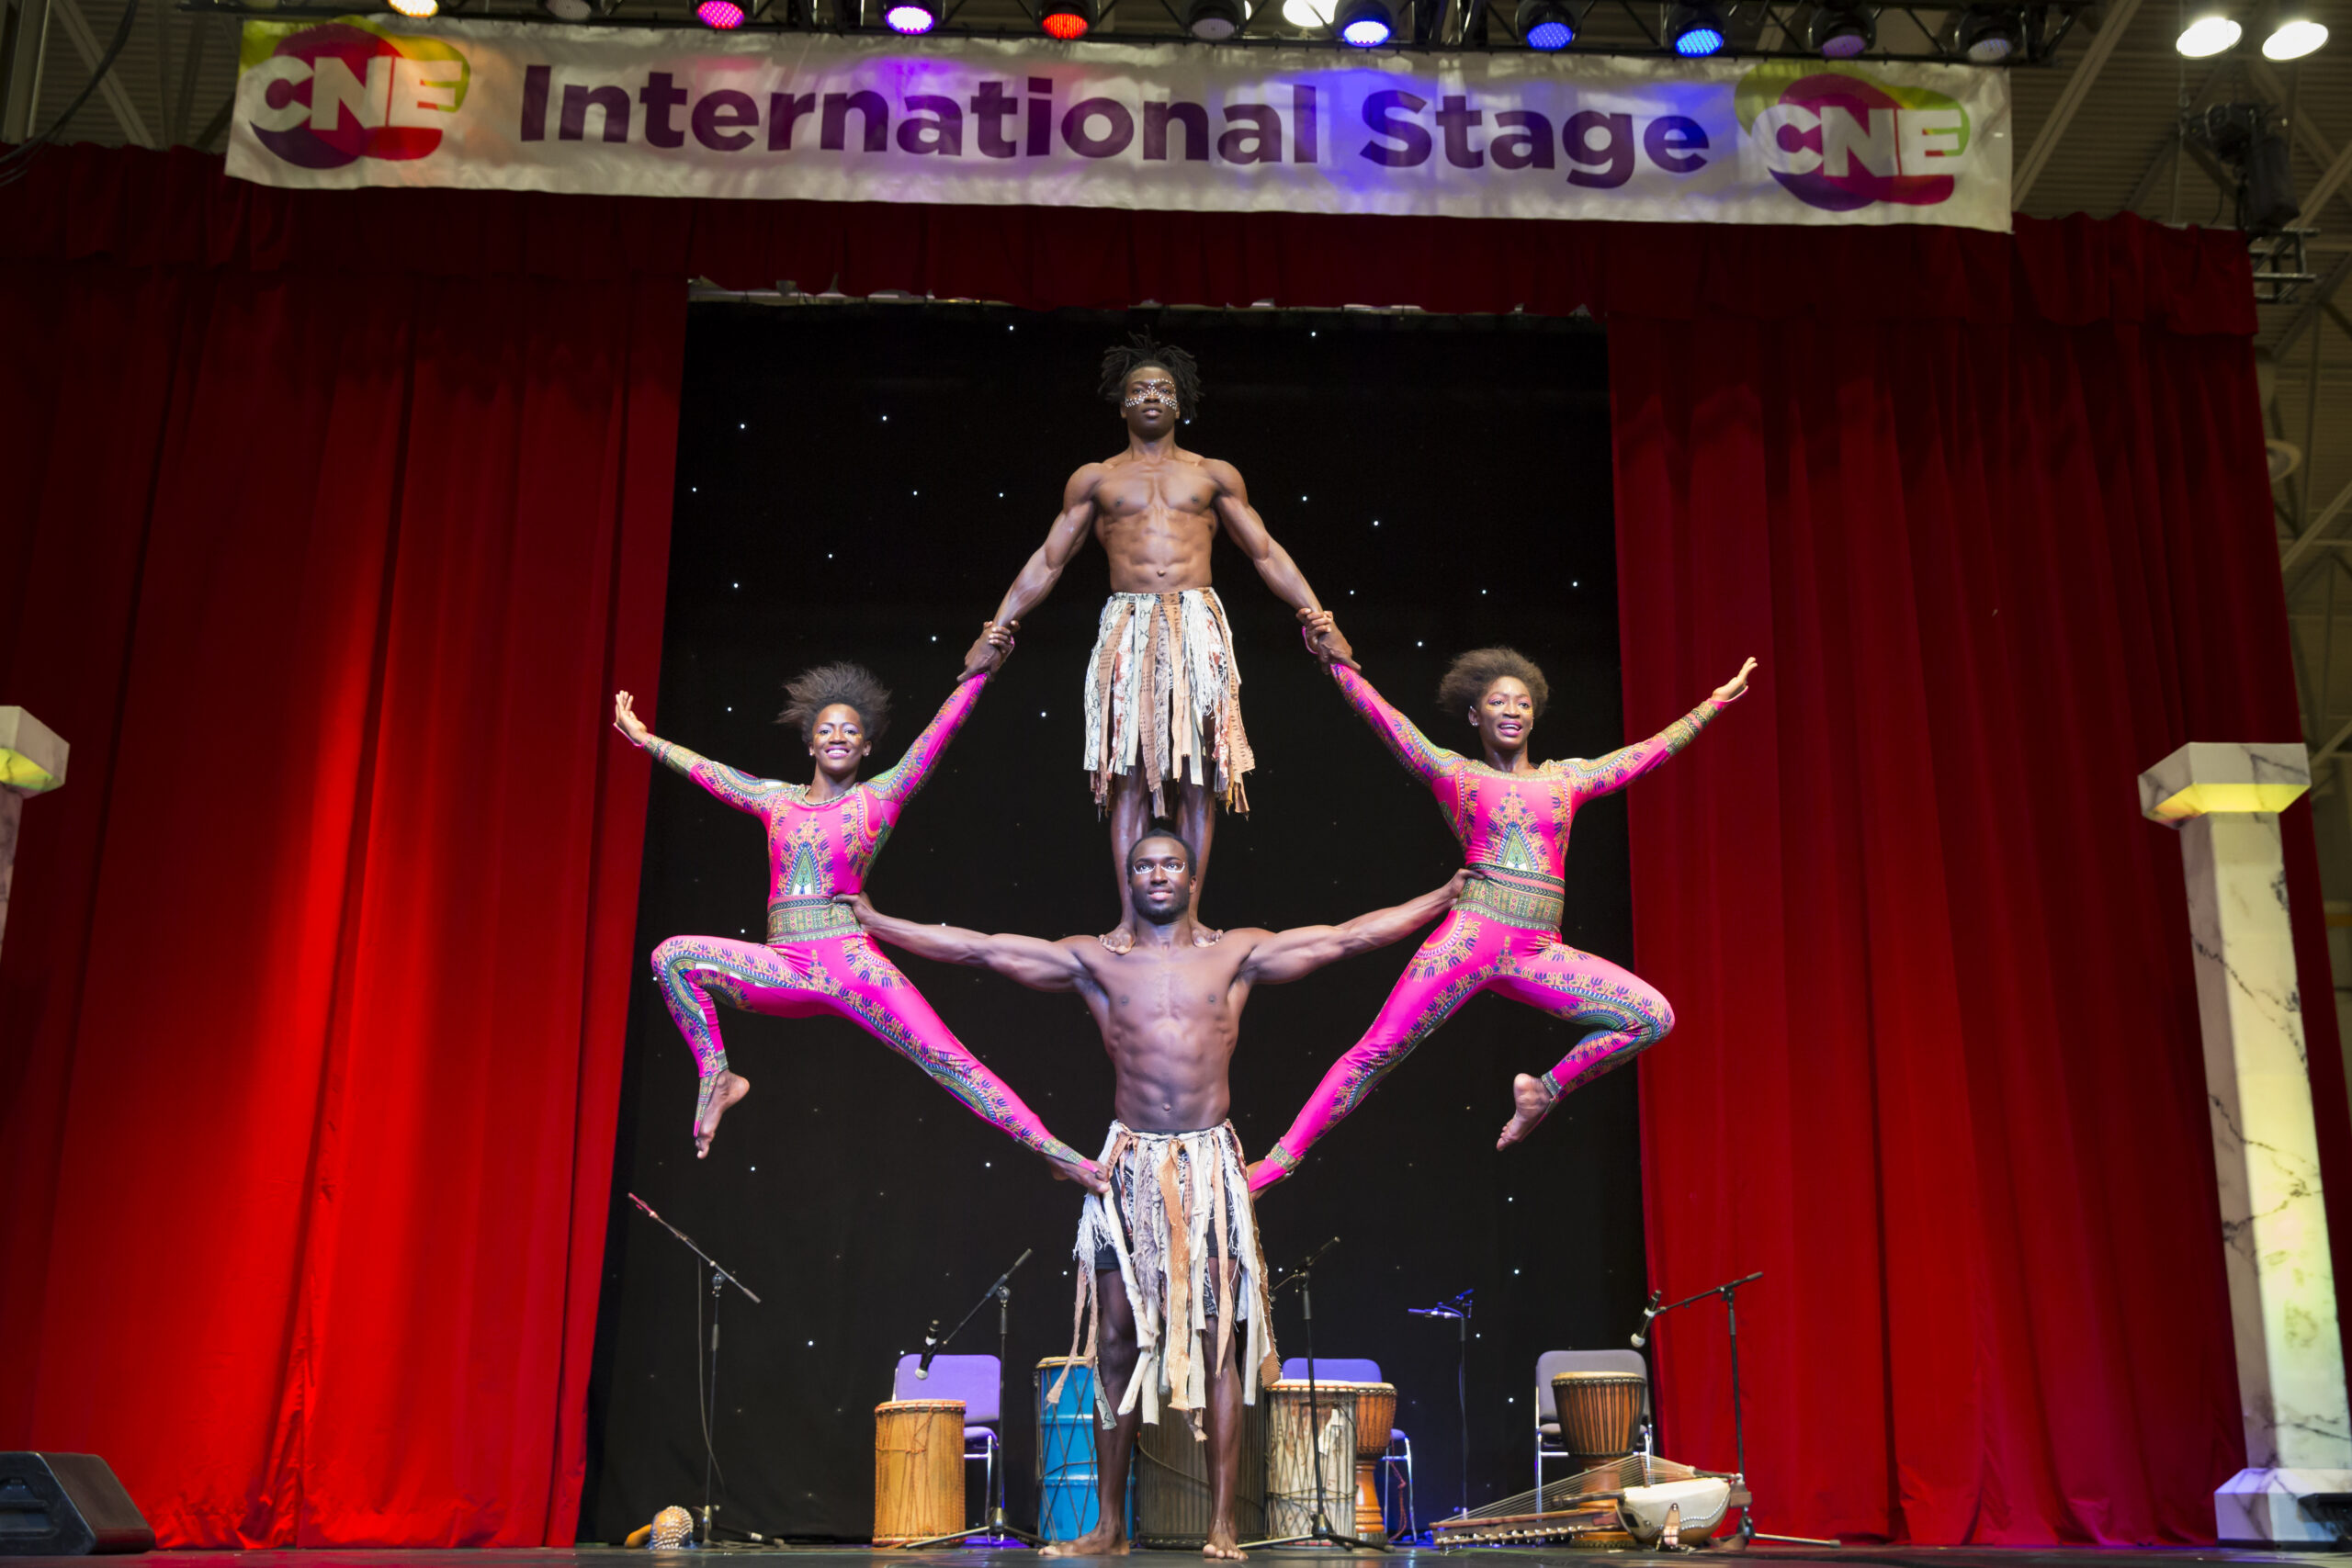 Image of International stage performers. Artists performing an acrobatic maneuver in formation.